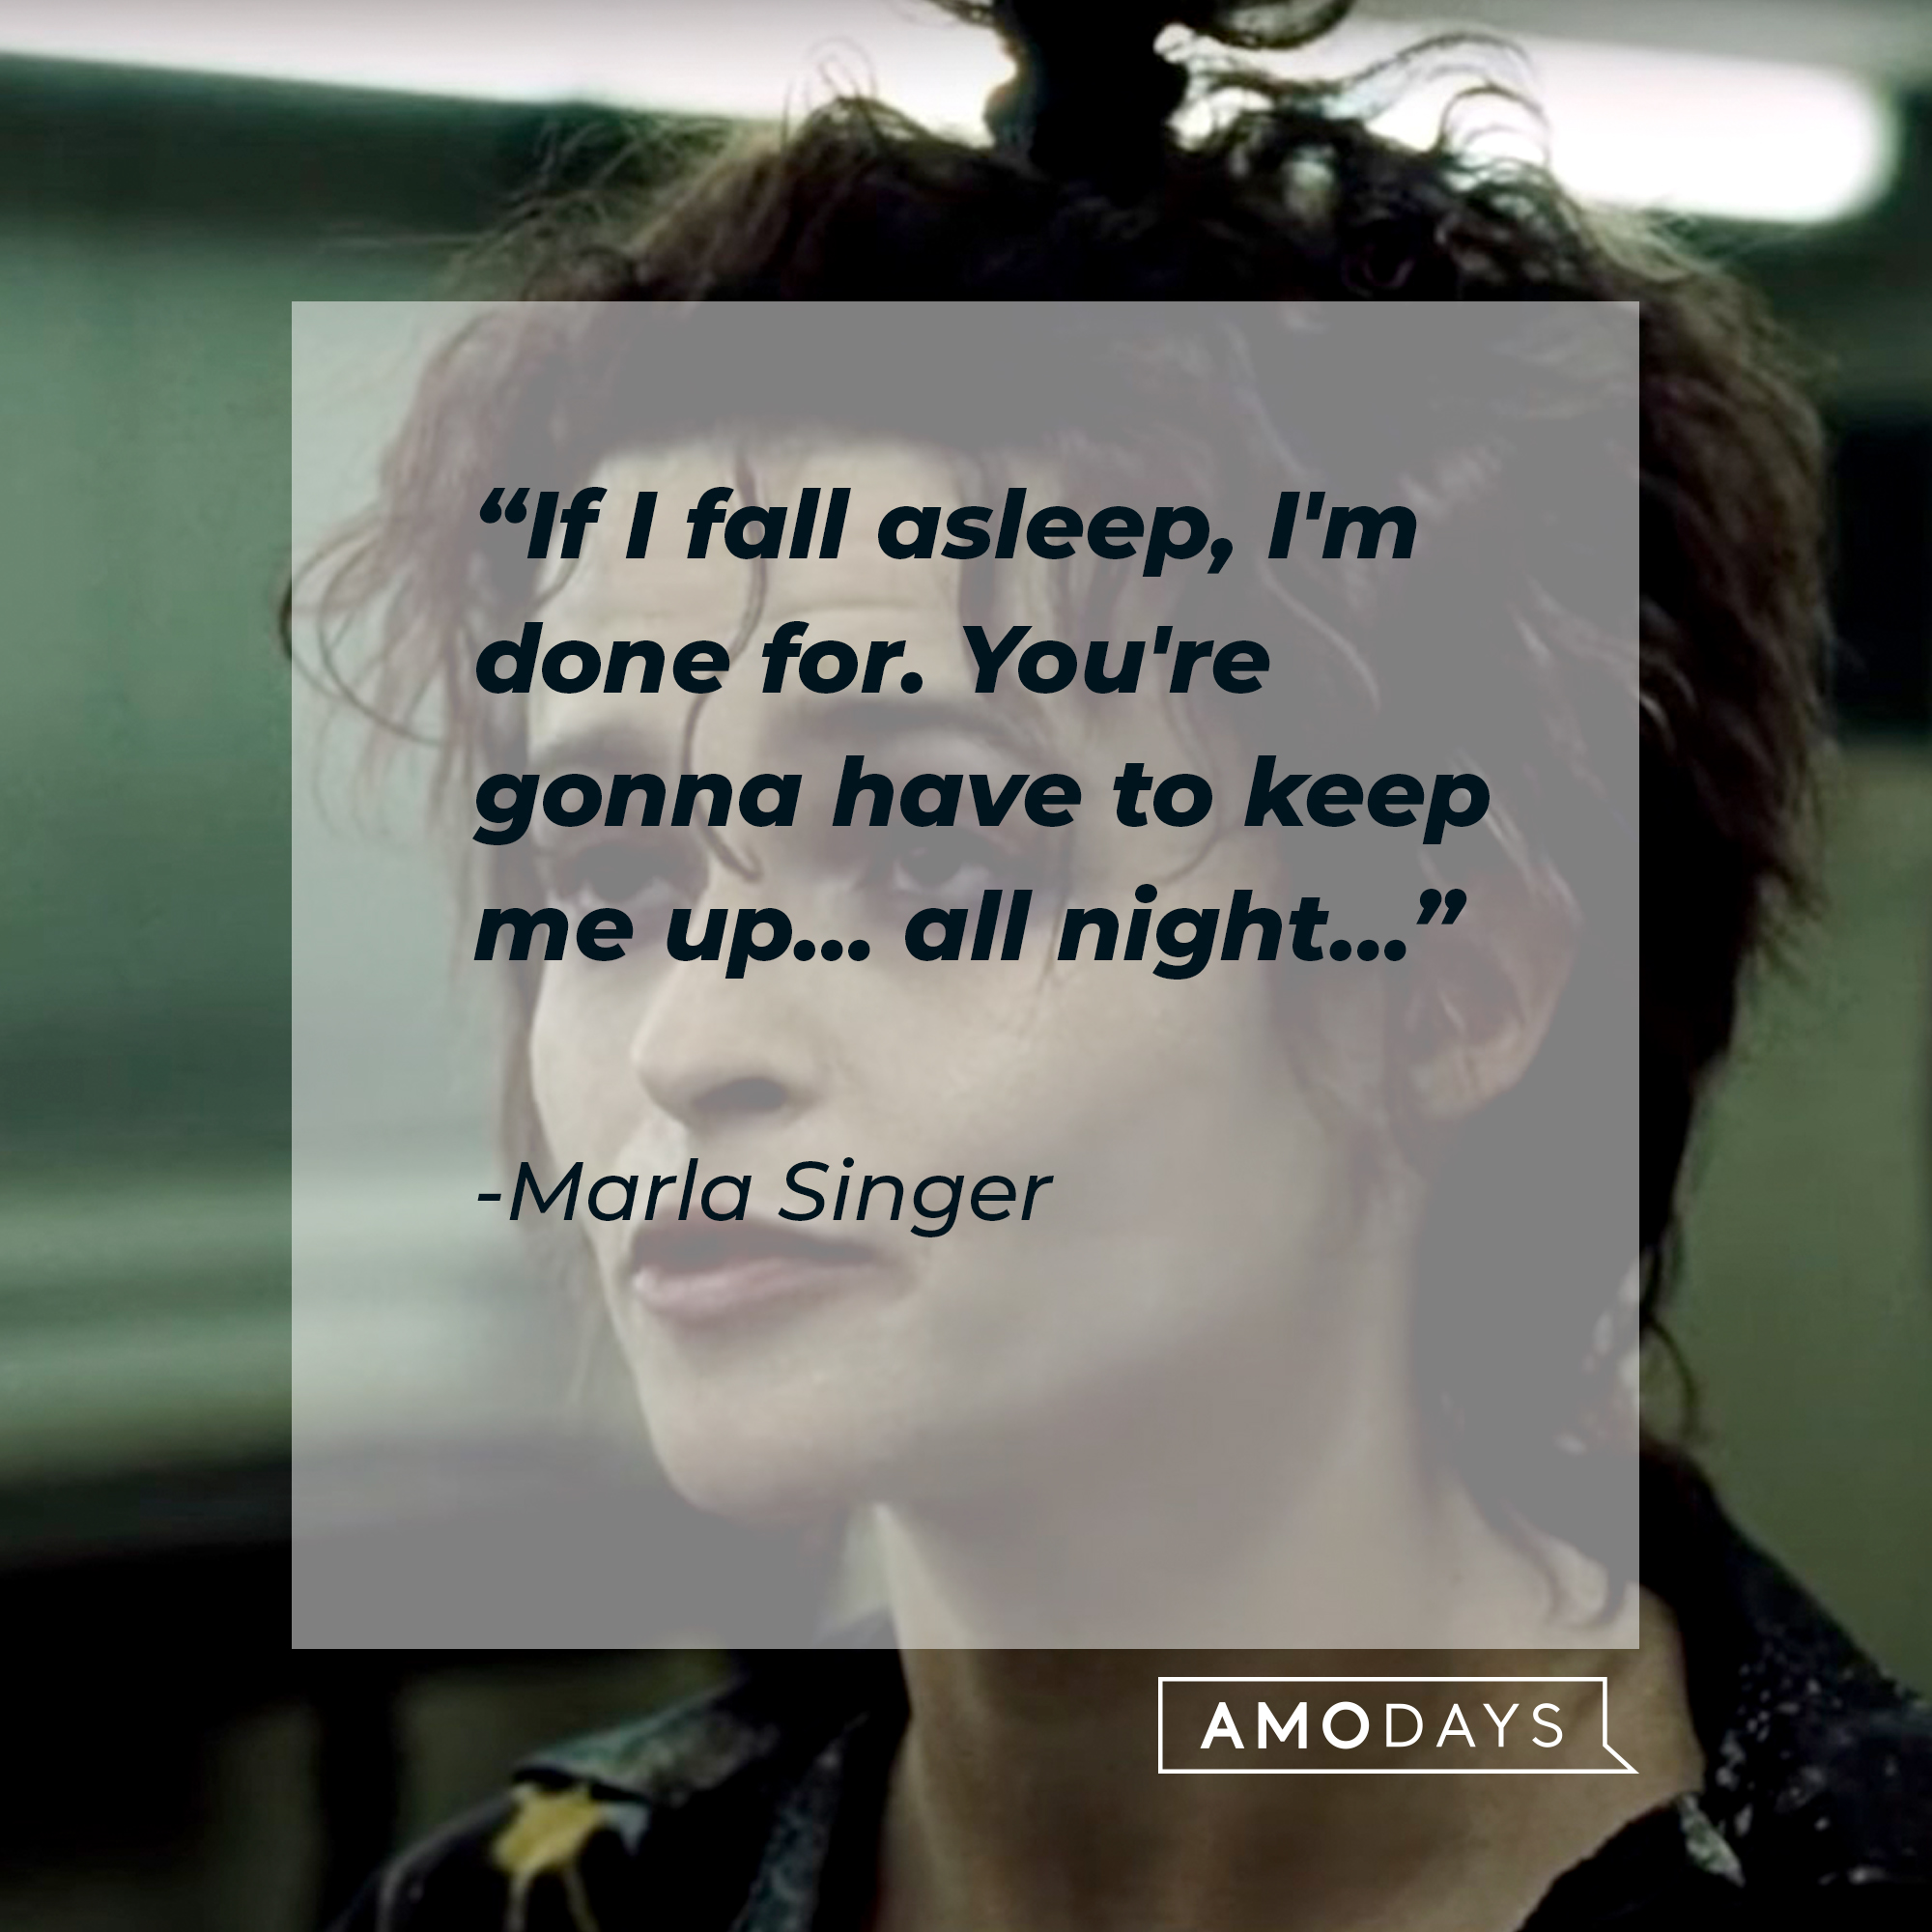 An image of Marla Singer with her quote:“If I fall asleep, I'm done for. You're gonna have to keep me up… all night…” | Image: facebook.com/FightClub